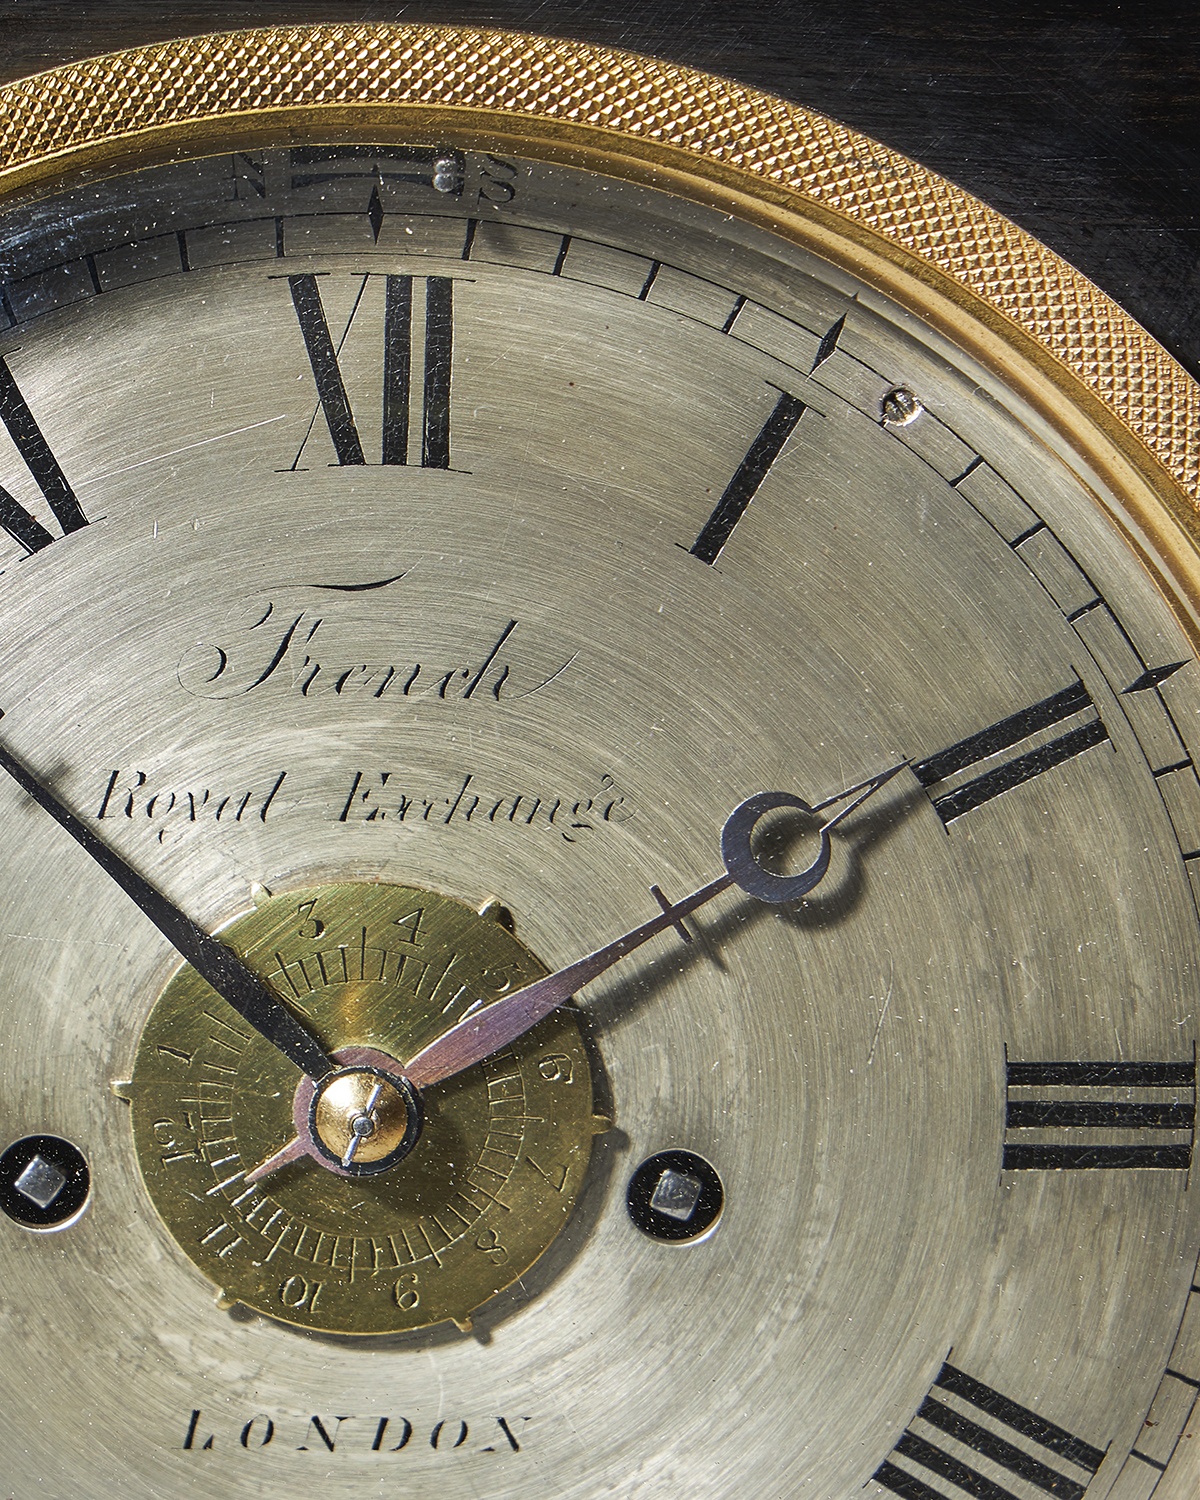 A unique early ninetieth-century travelling clock signed French Royal Exchange LONDON 10